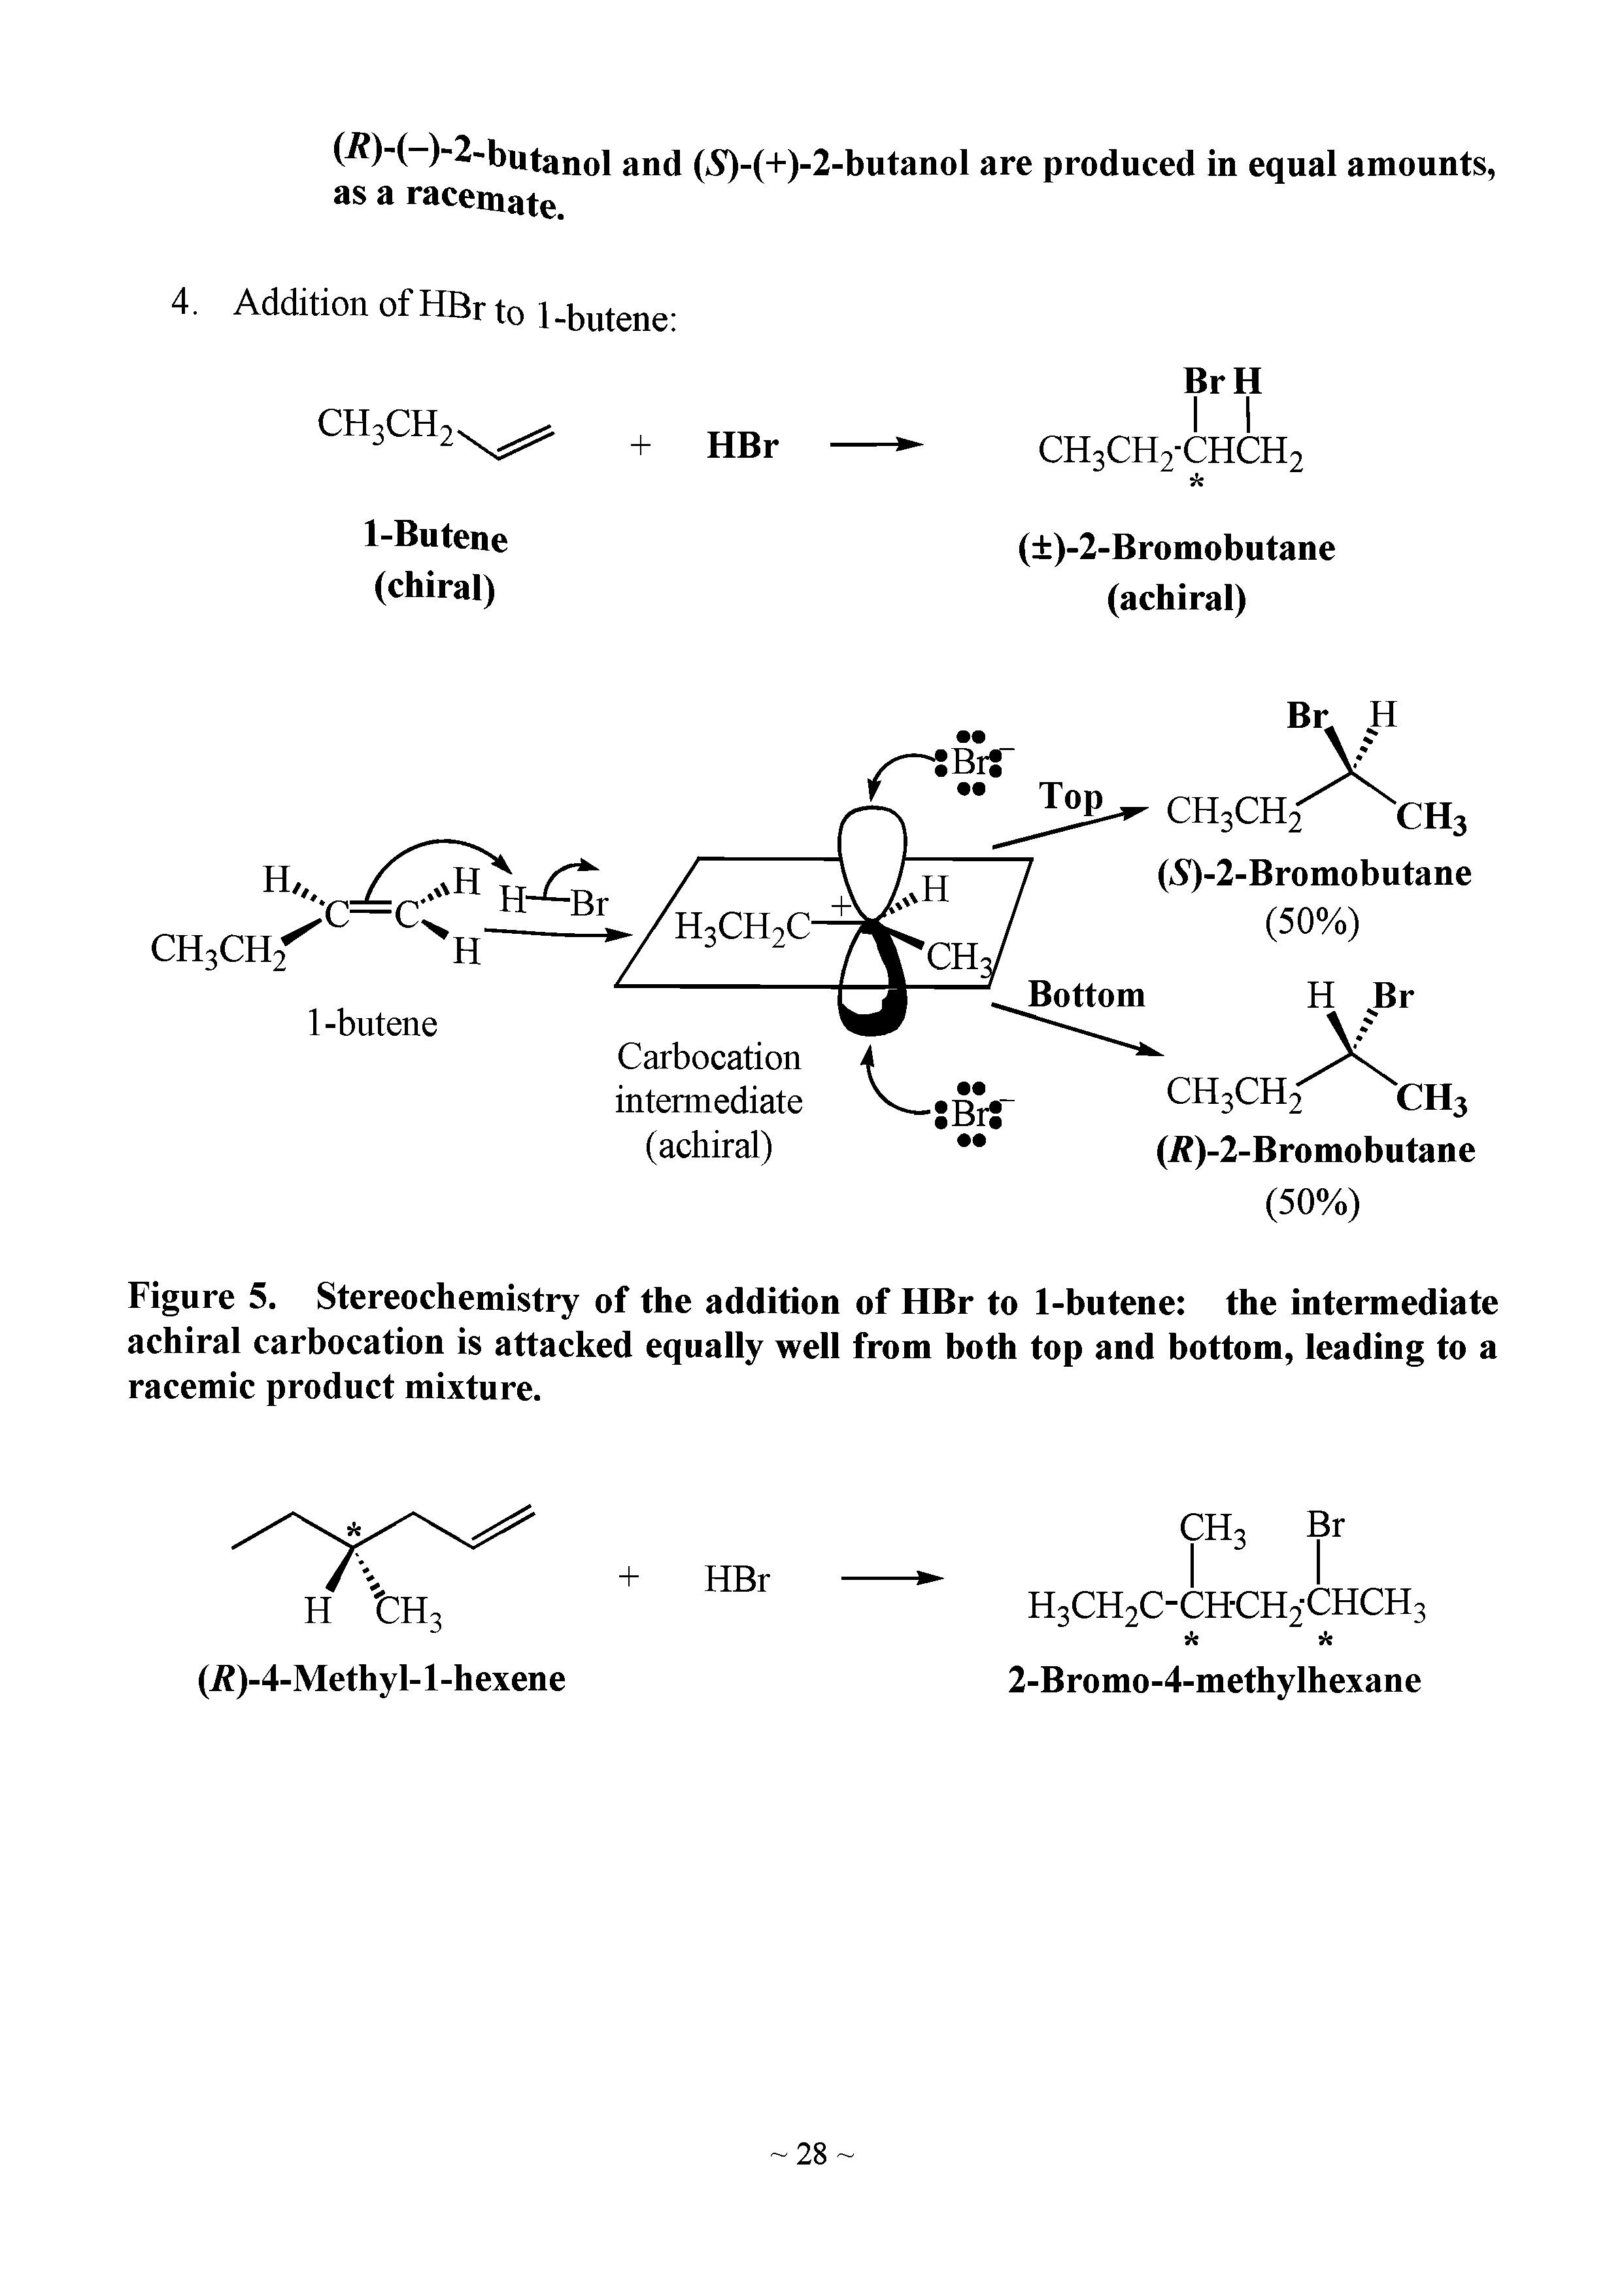 Figure 5. Stereochemistry of the addition of HBr to 1-butene the intermediate achiral carbocation is attacked equally well from both top and bottom, leading to a racemic product mixture.